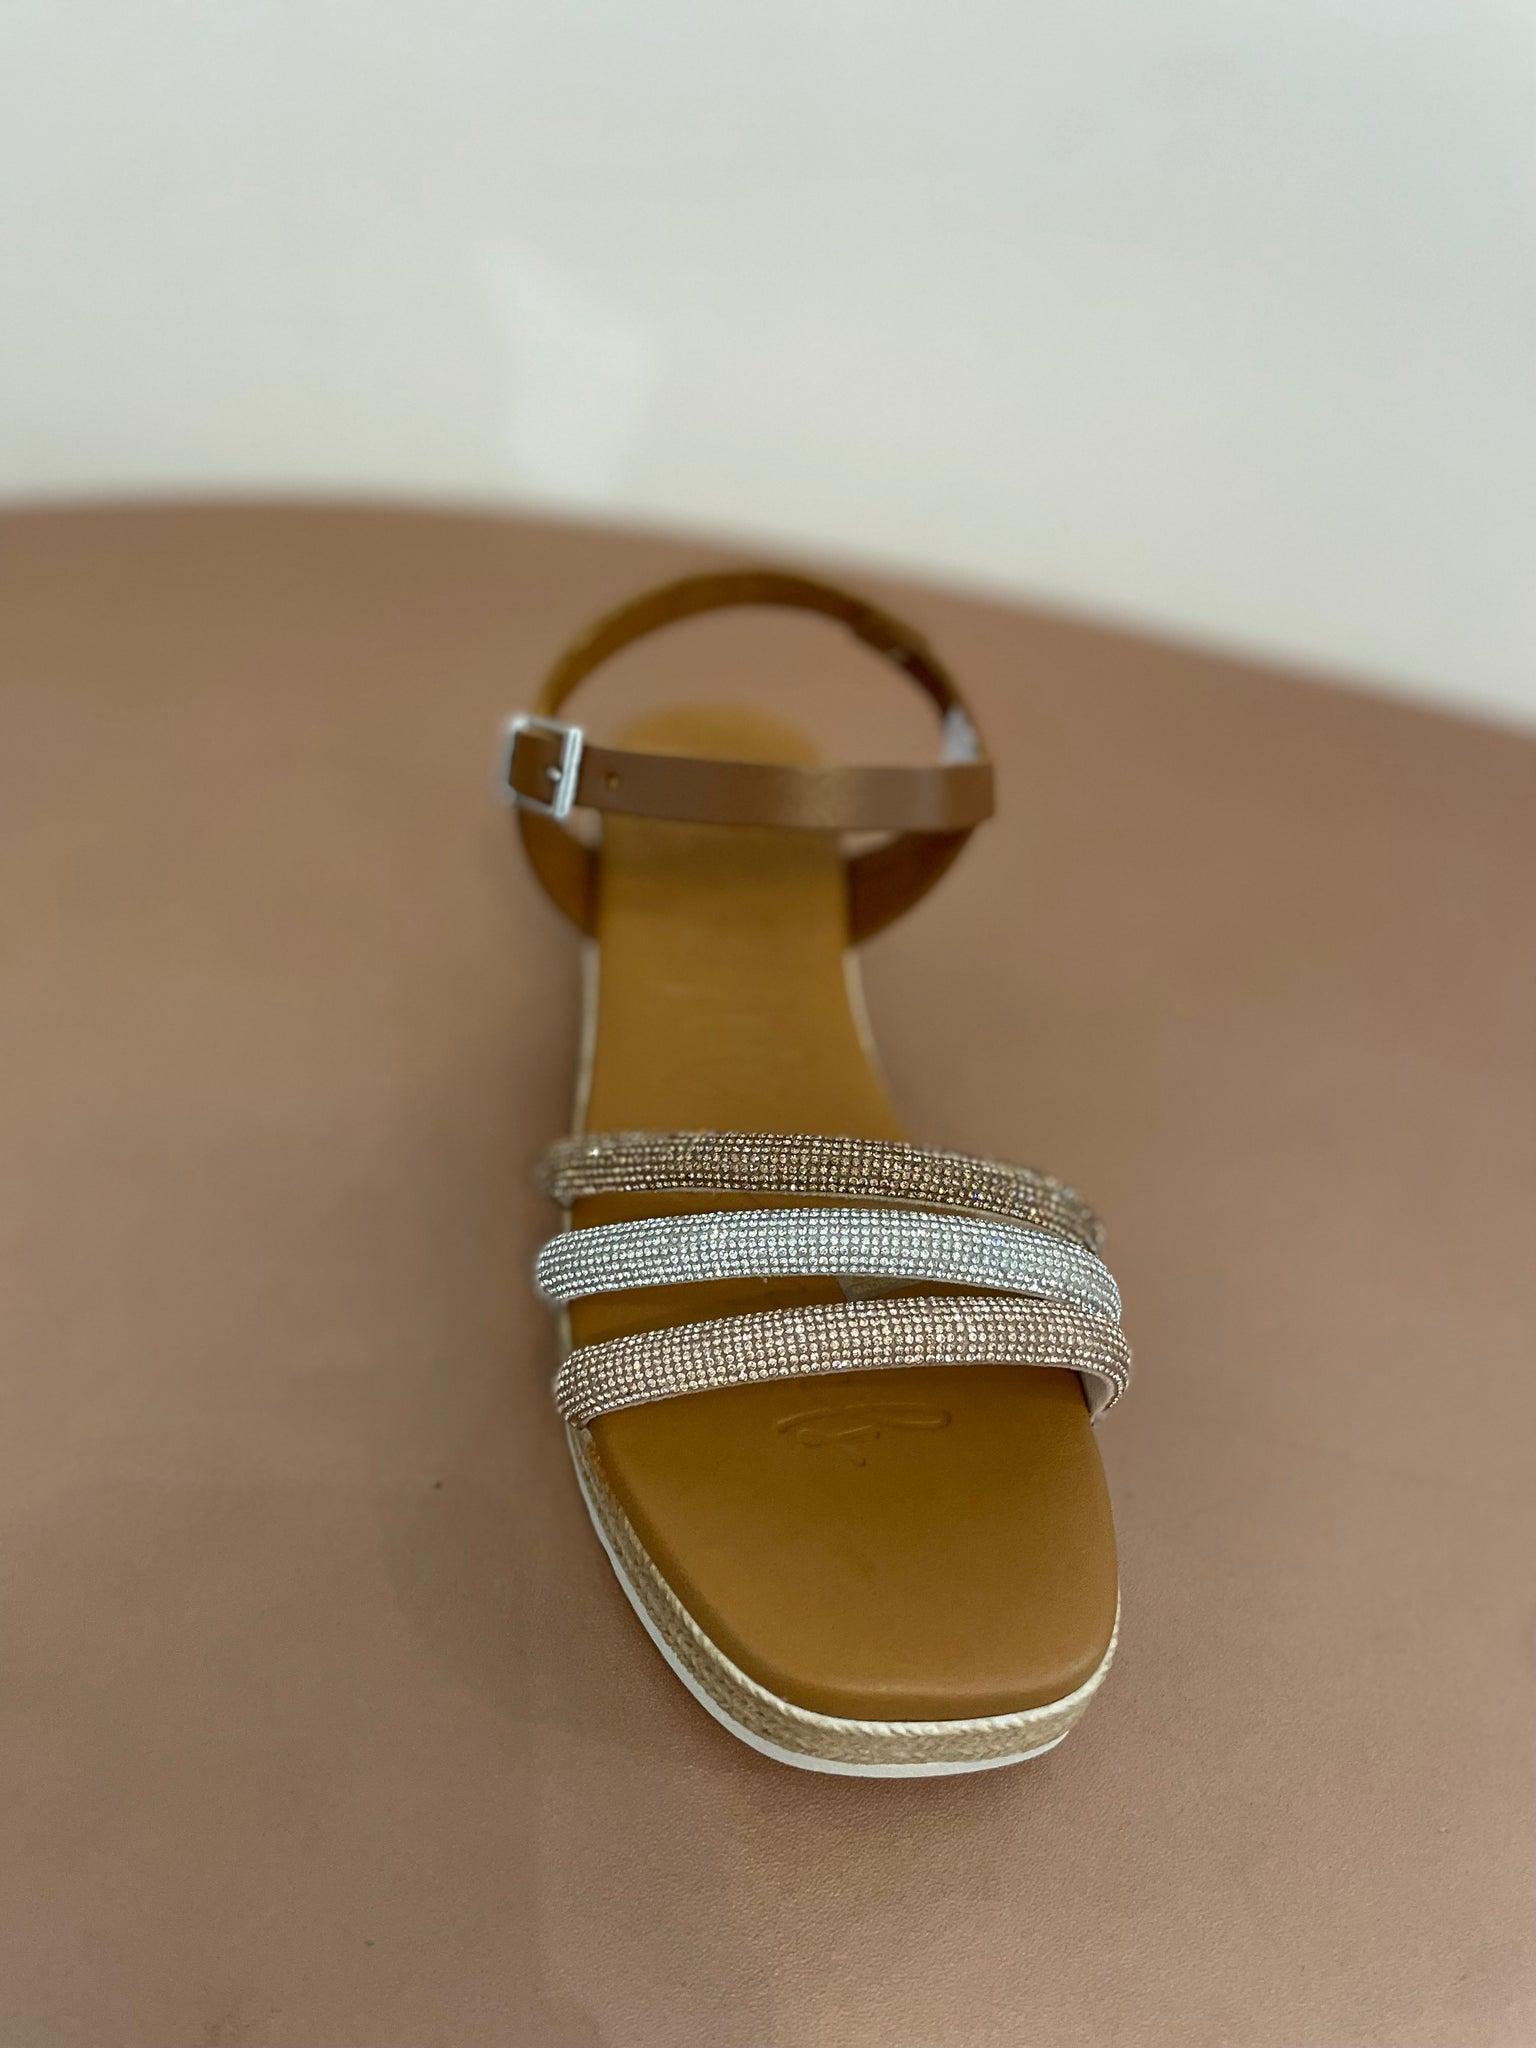 Sandale femme Oh my sandals